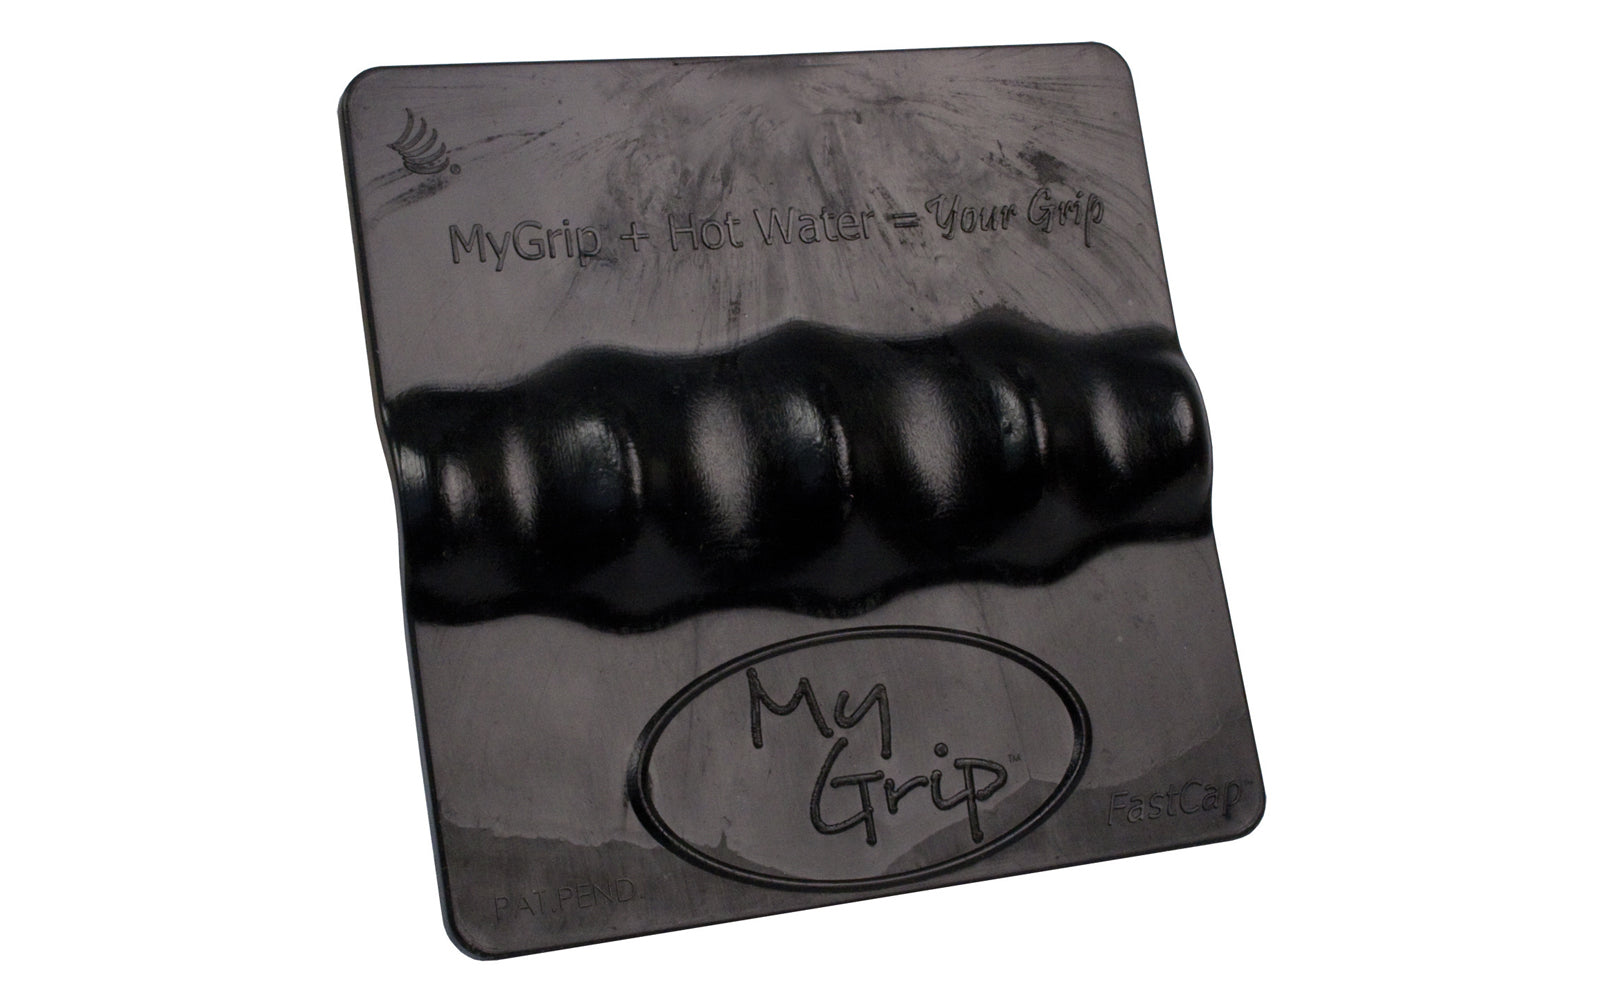 The FastCap My Grip Custom Grip gives you the ultimate comfort grip on your hand tools, sports equipment, or anything else with a handle. Excellent for tools, handles, power tools, handle bars, sporting equipment & more. FastCap My Grip 1 Pack. Just place in hot water for 2 minutes & mold. Reduces fatigue & vibration